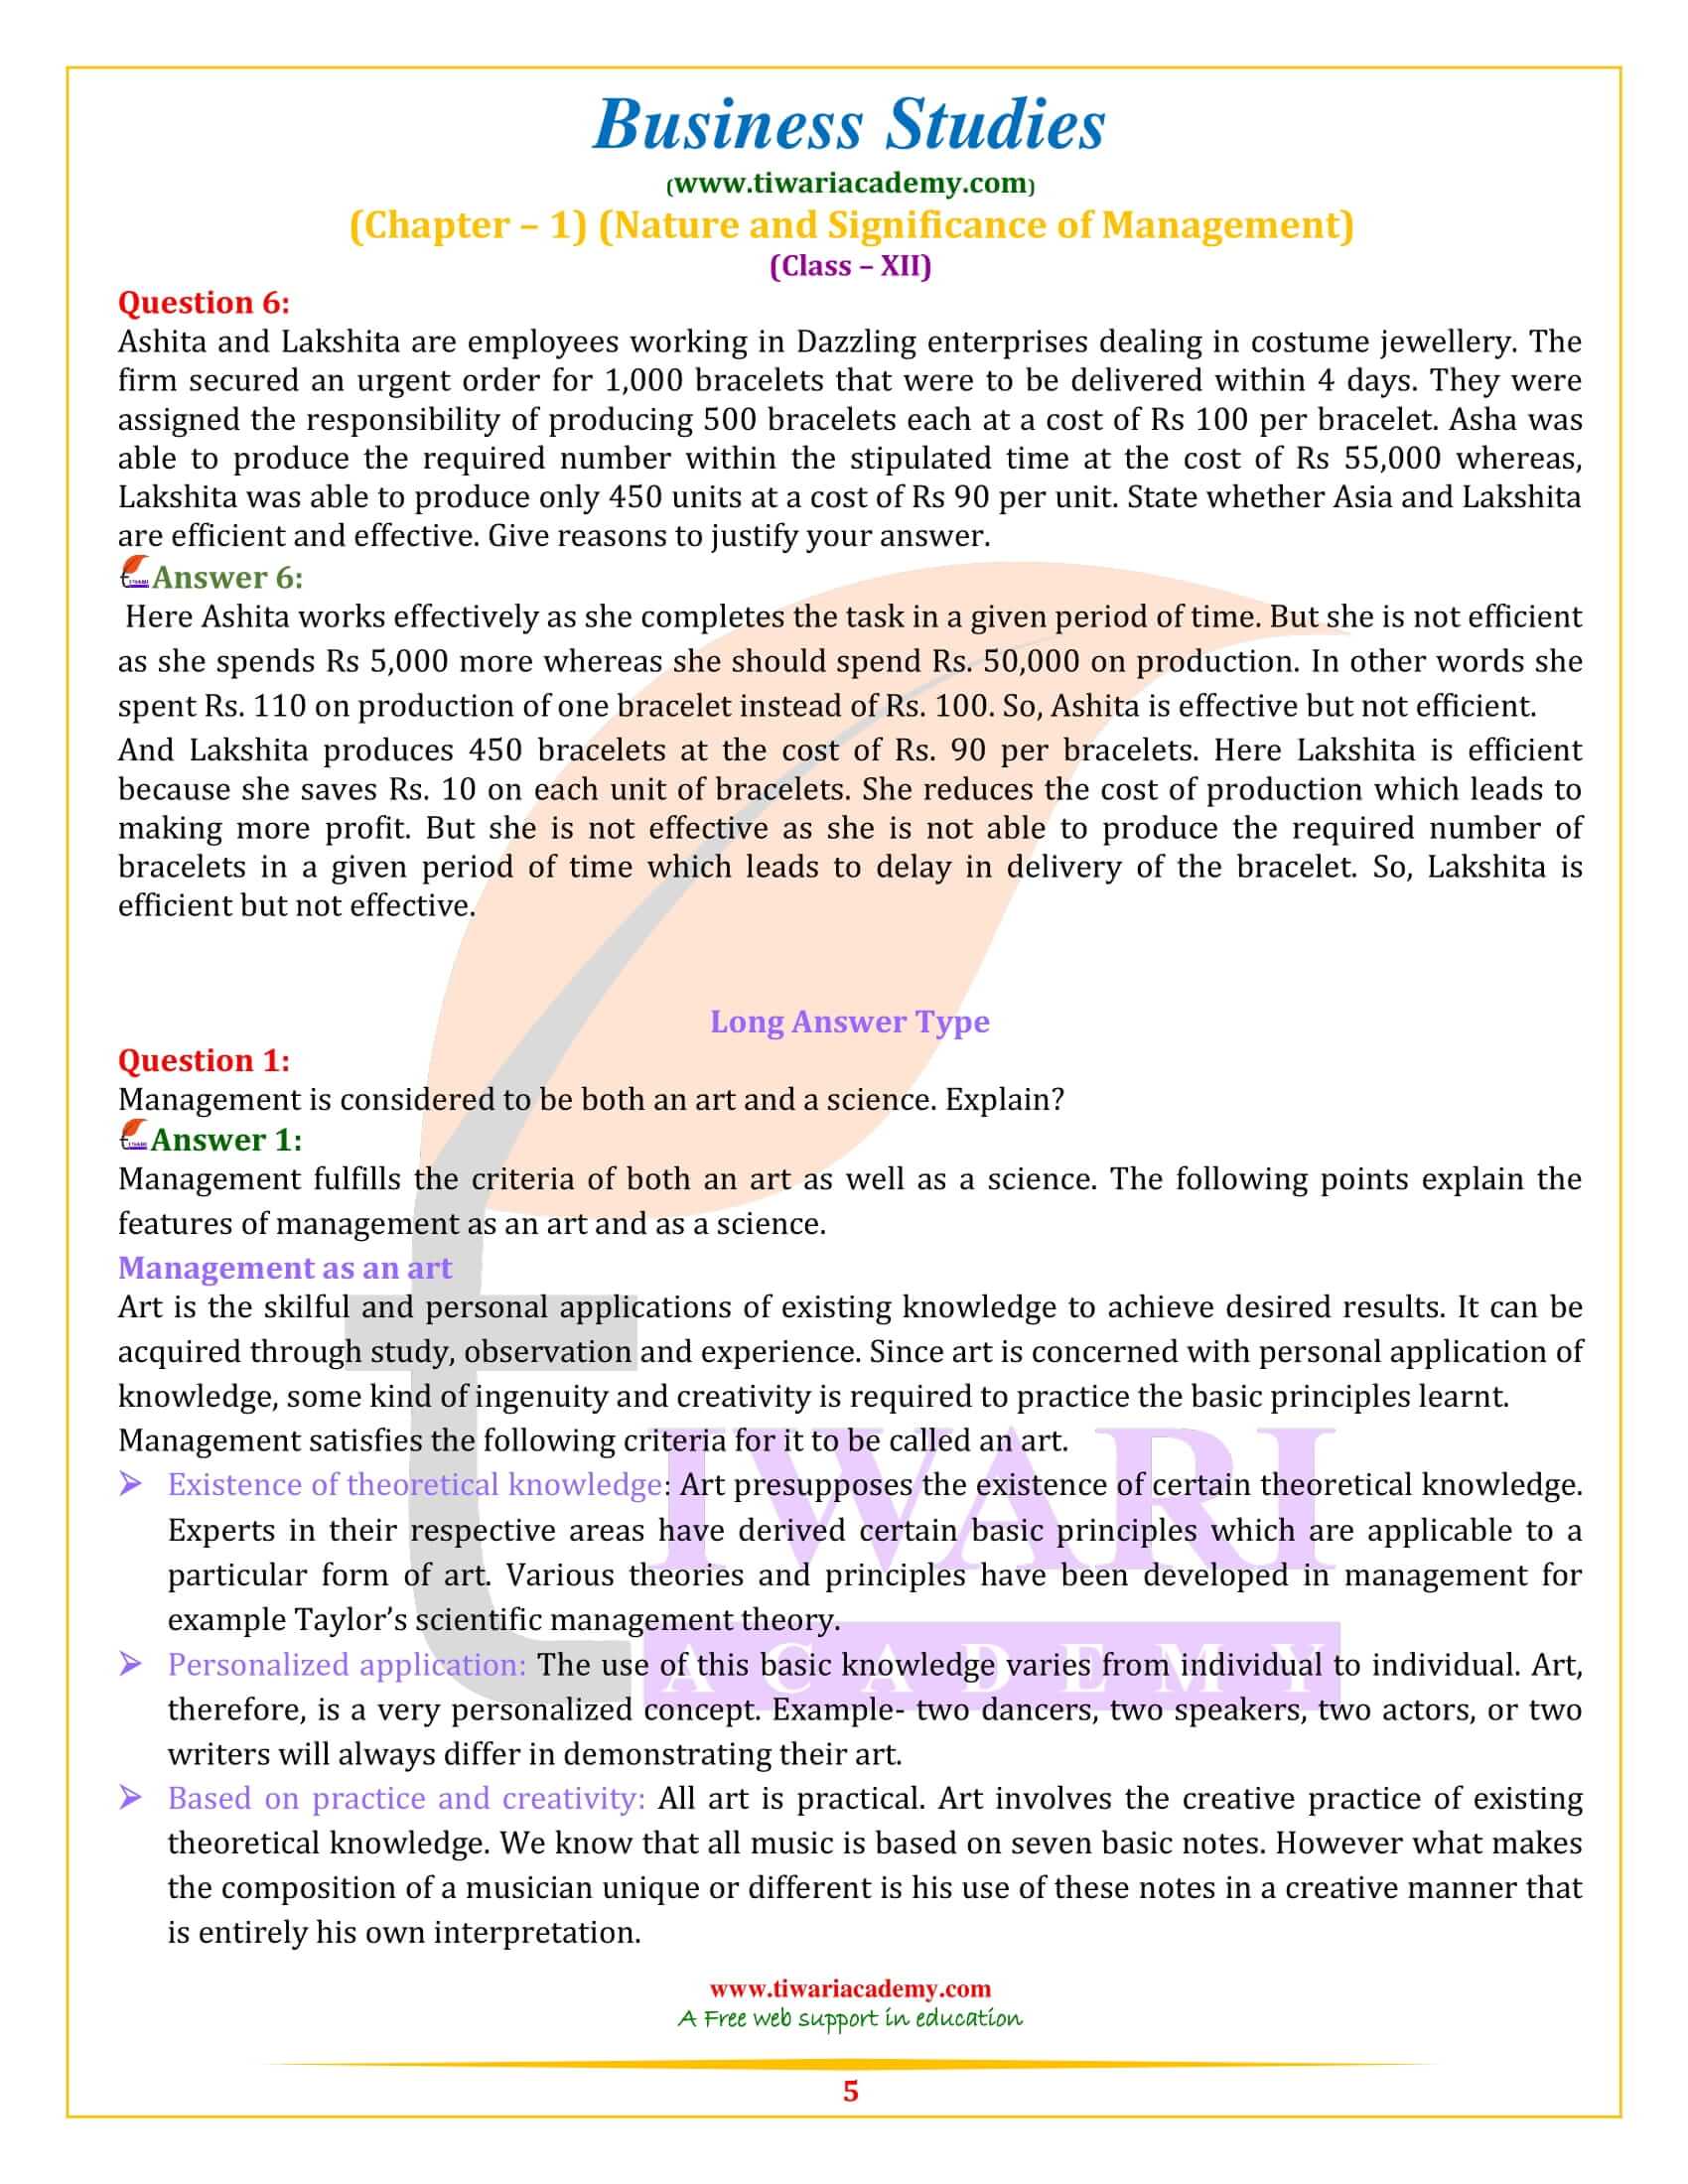 NCERT Solutions for Class 12 Business Studies Chapter 1 free download